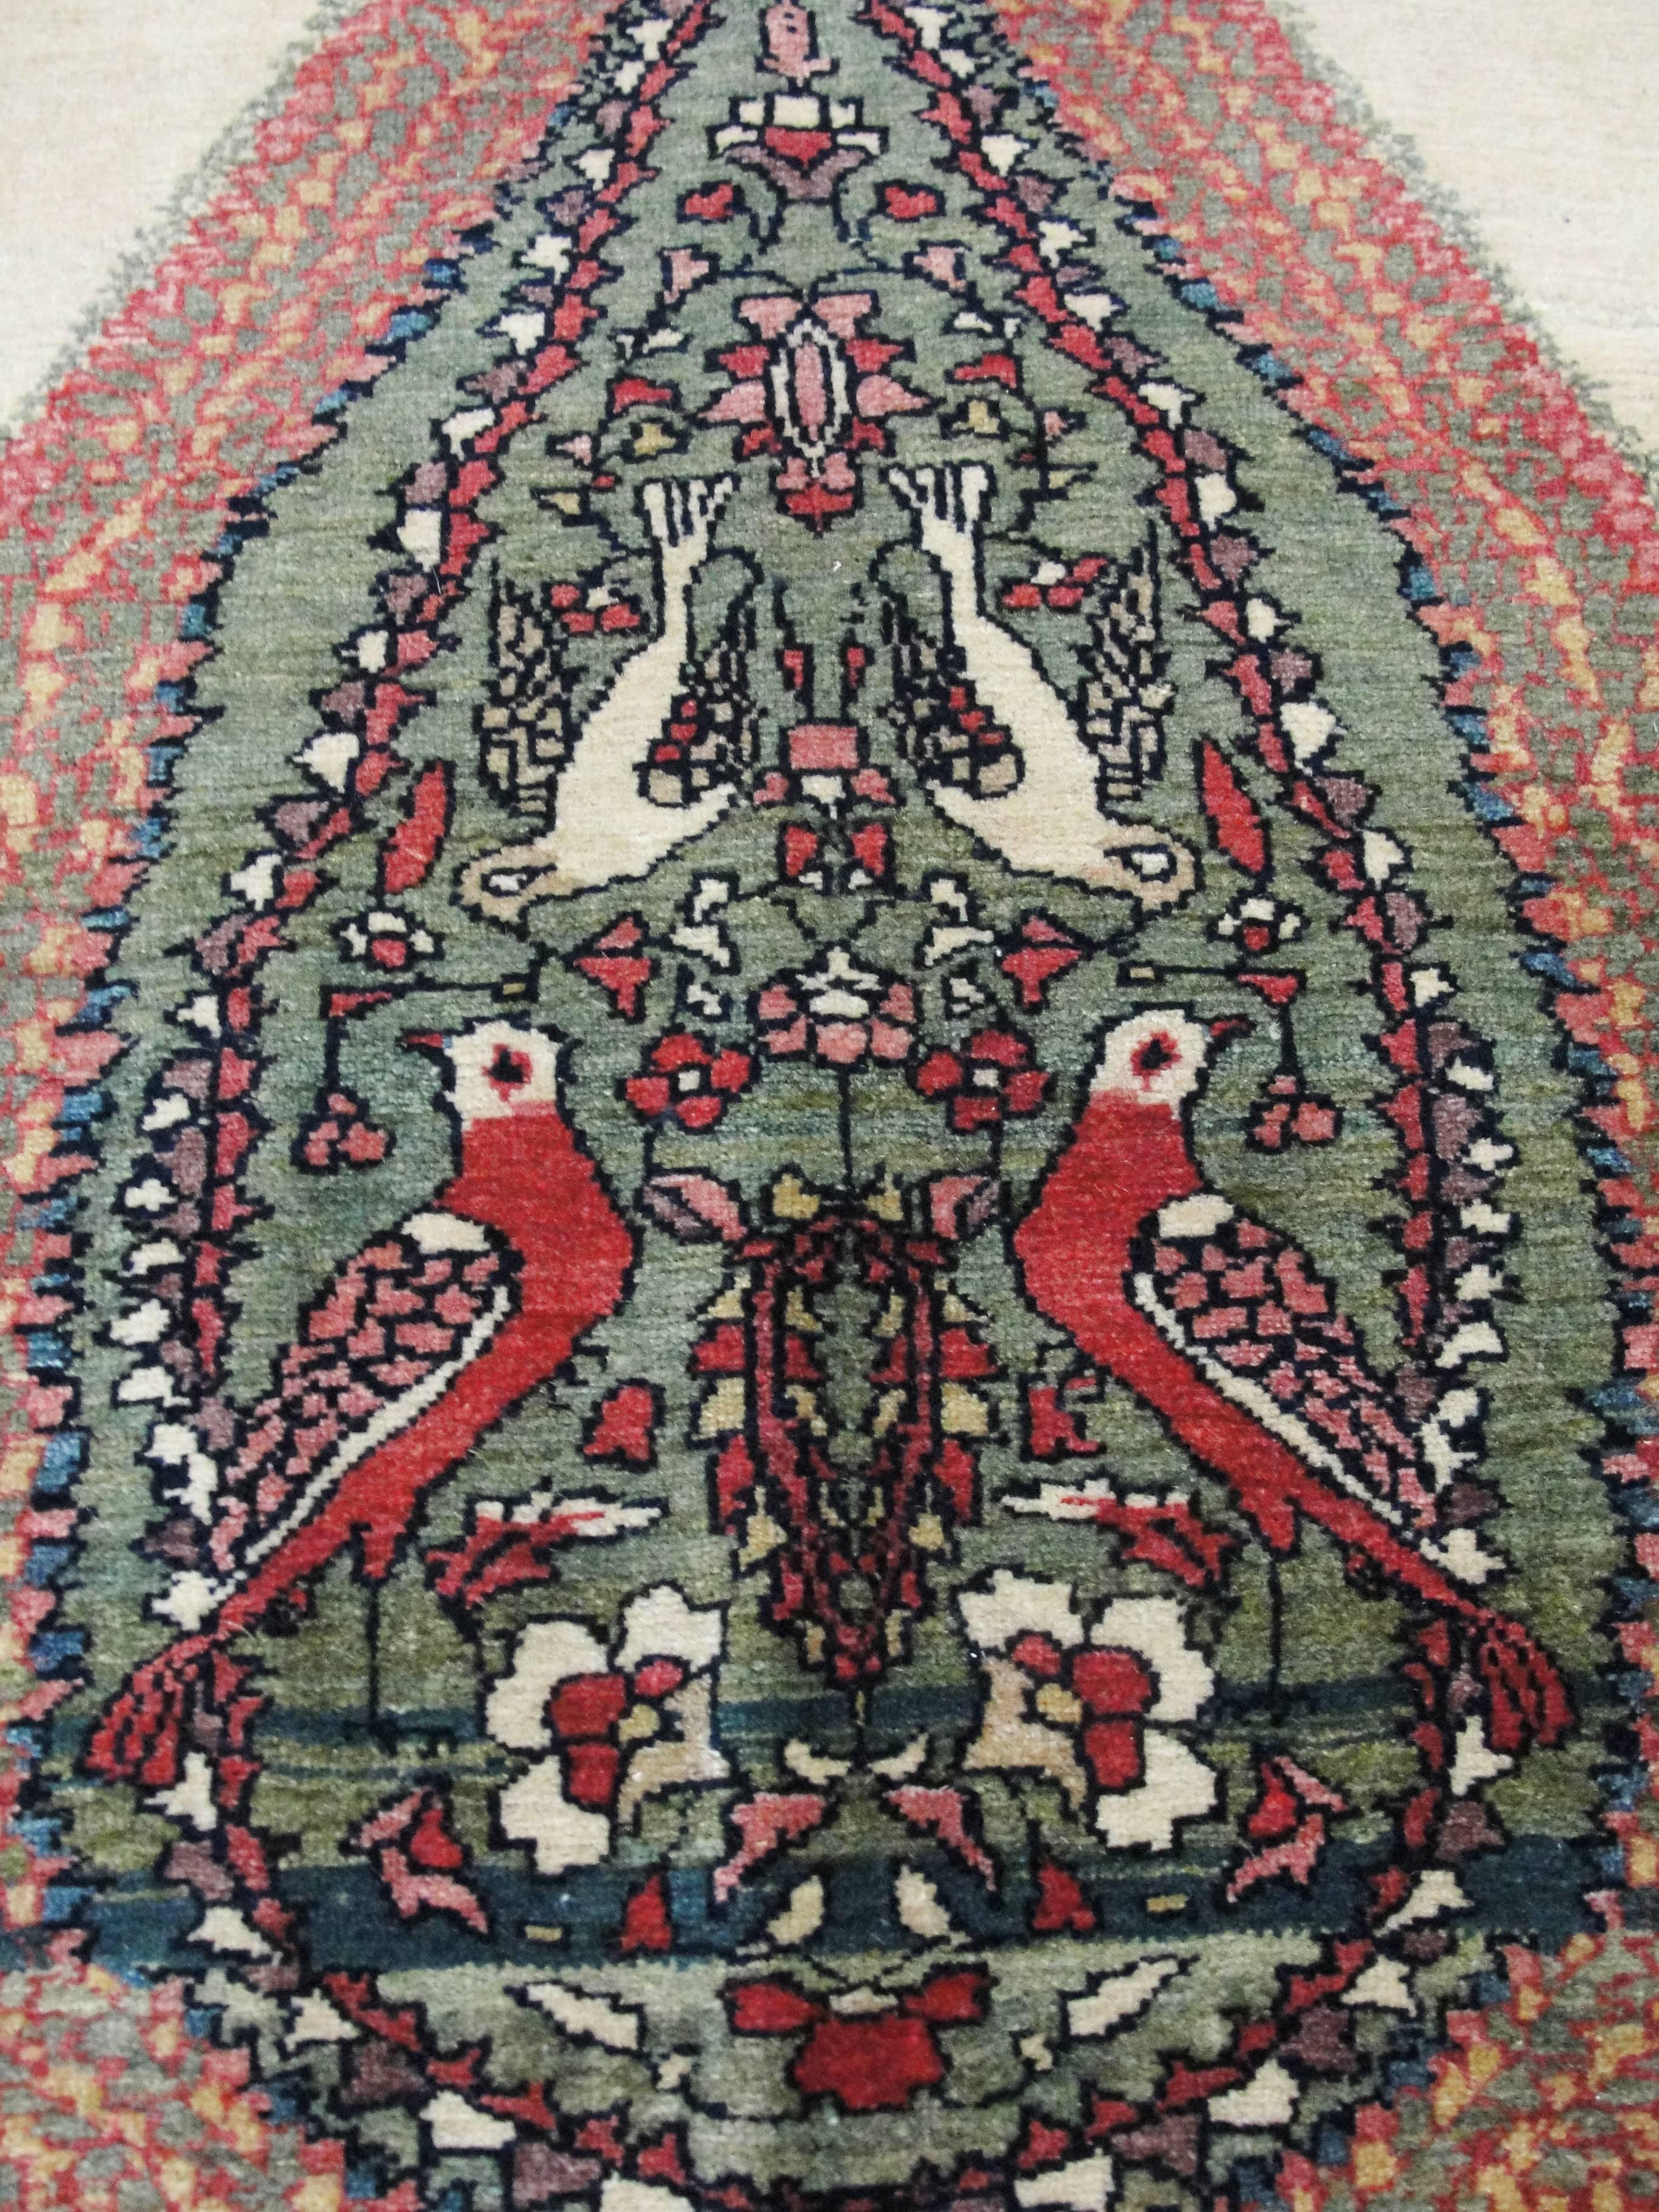 Tree of life Feraghan Sarouk with birds of happiness.
The Feraghan district located south of Tehran, encompassed the cities of Arak, Qum and Kashan, an area with a long and illustrious history of rug and carpet weaving. In the nineteenth century,